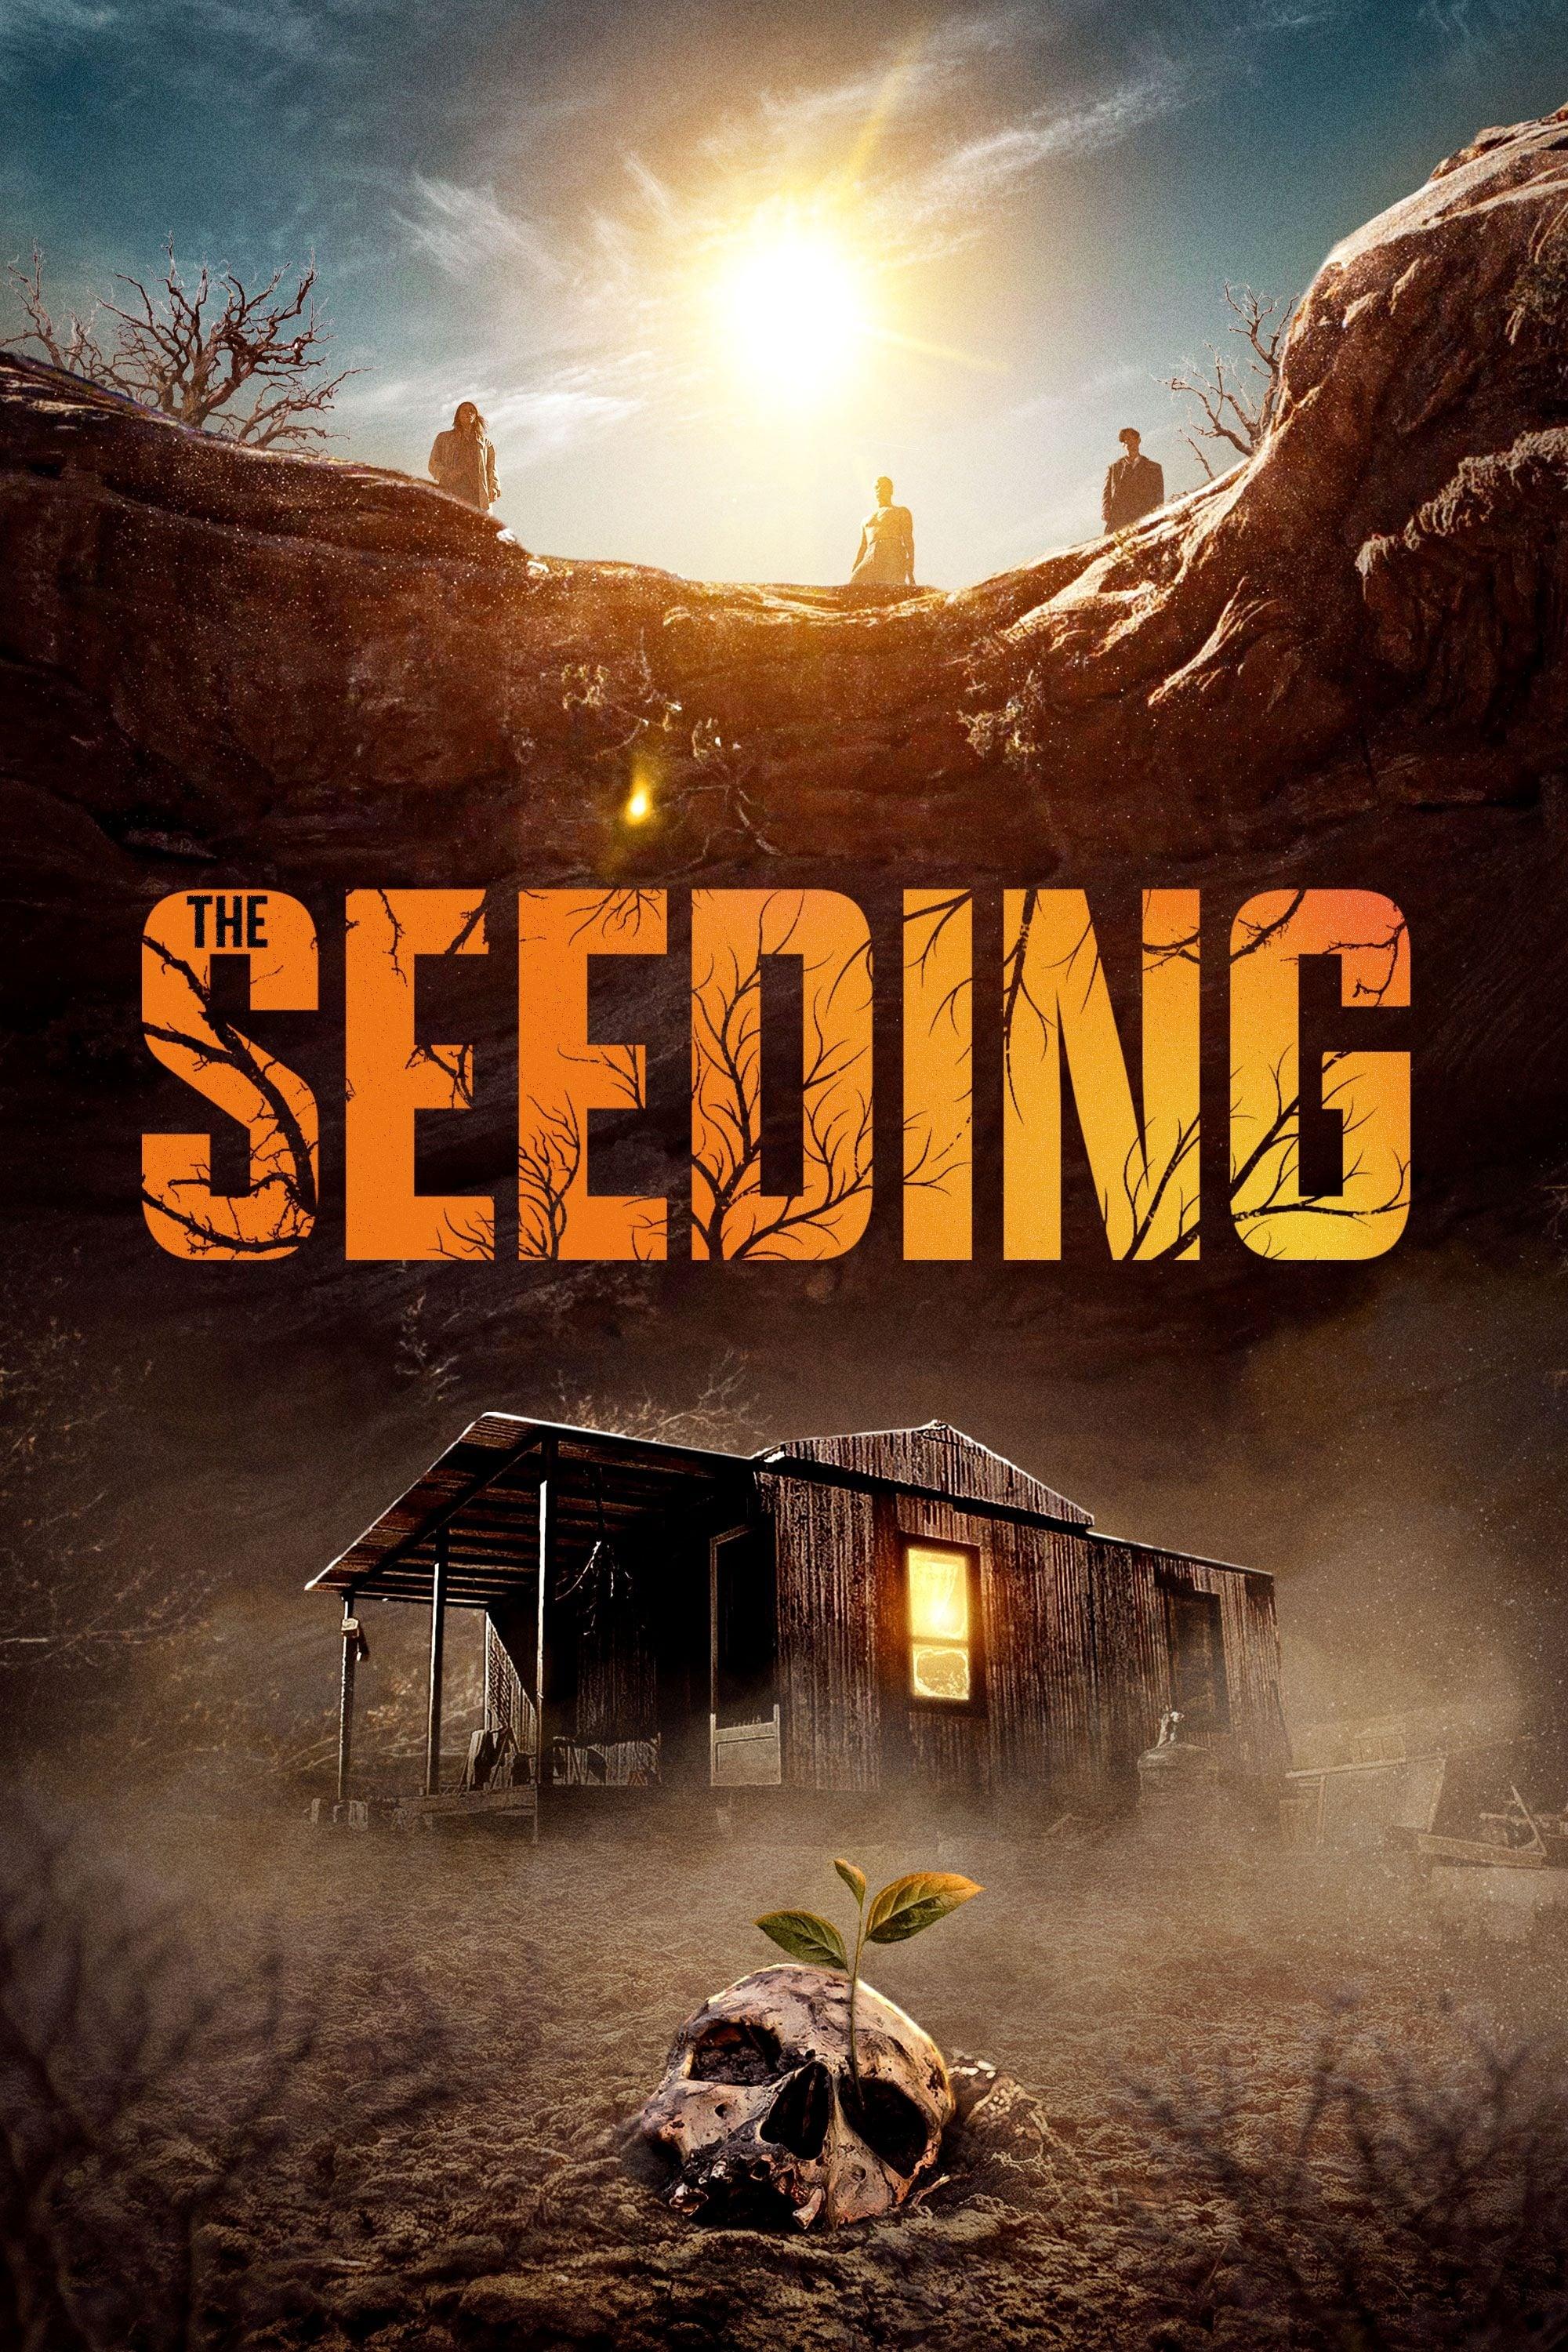 The Seeding poster